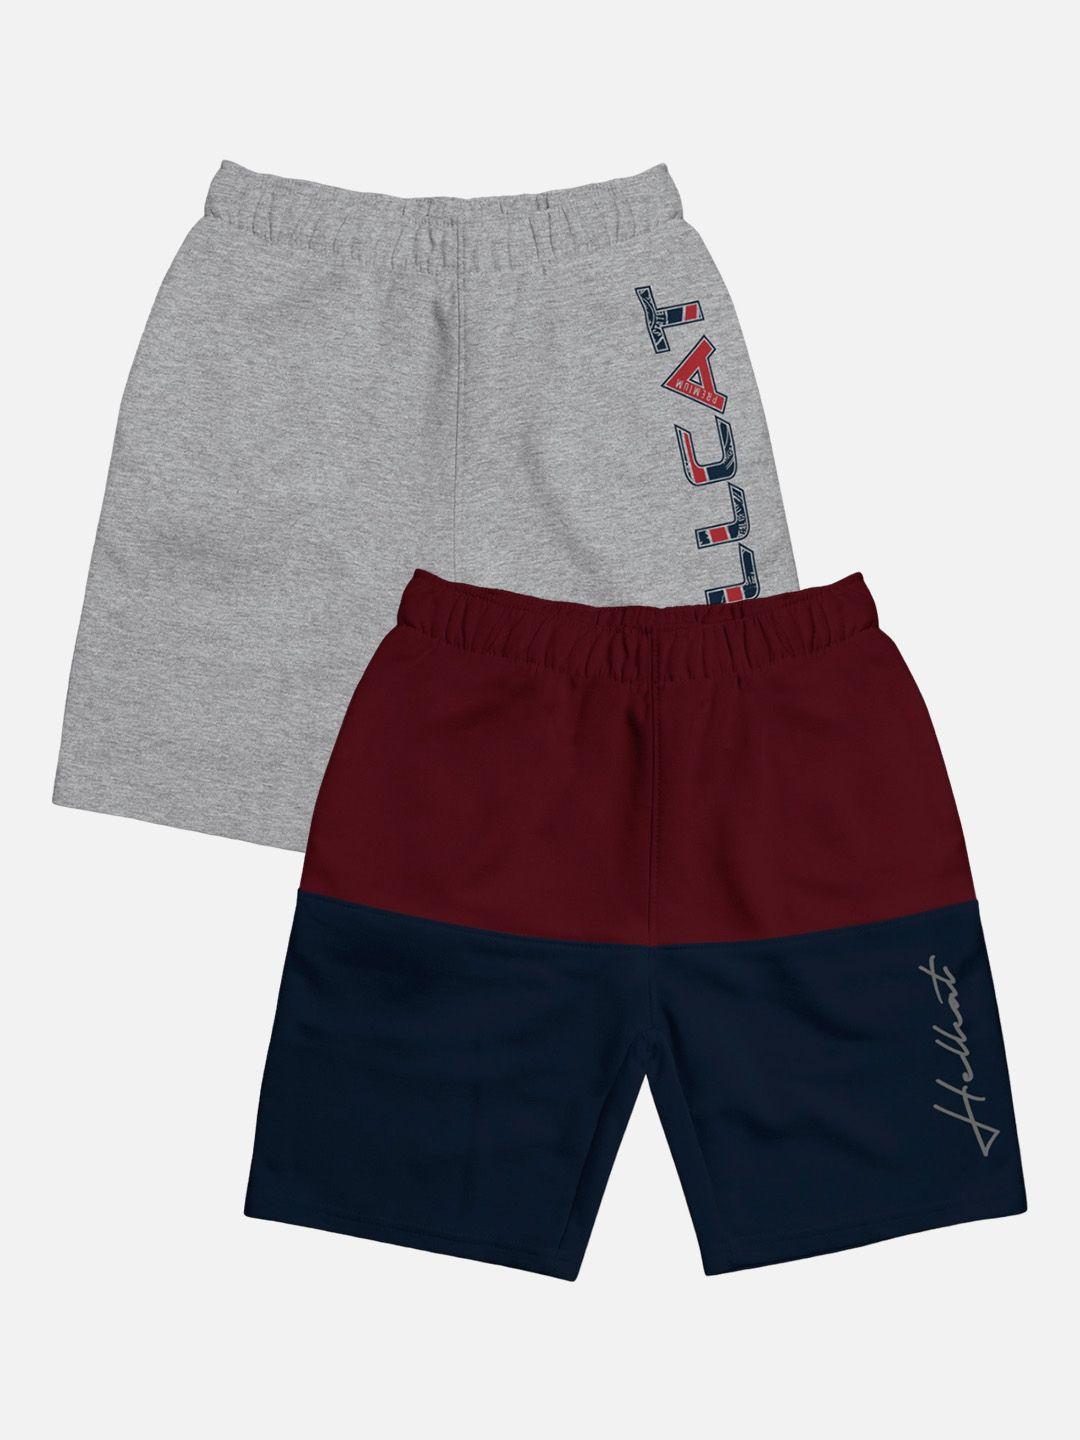 hellcat boys pack of 2 typography printed cotton shorts